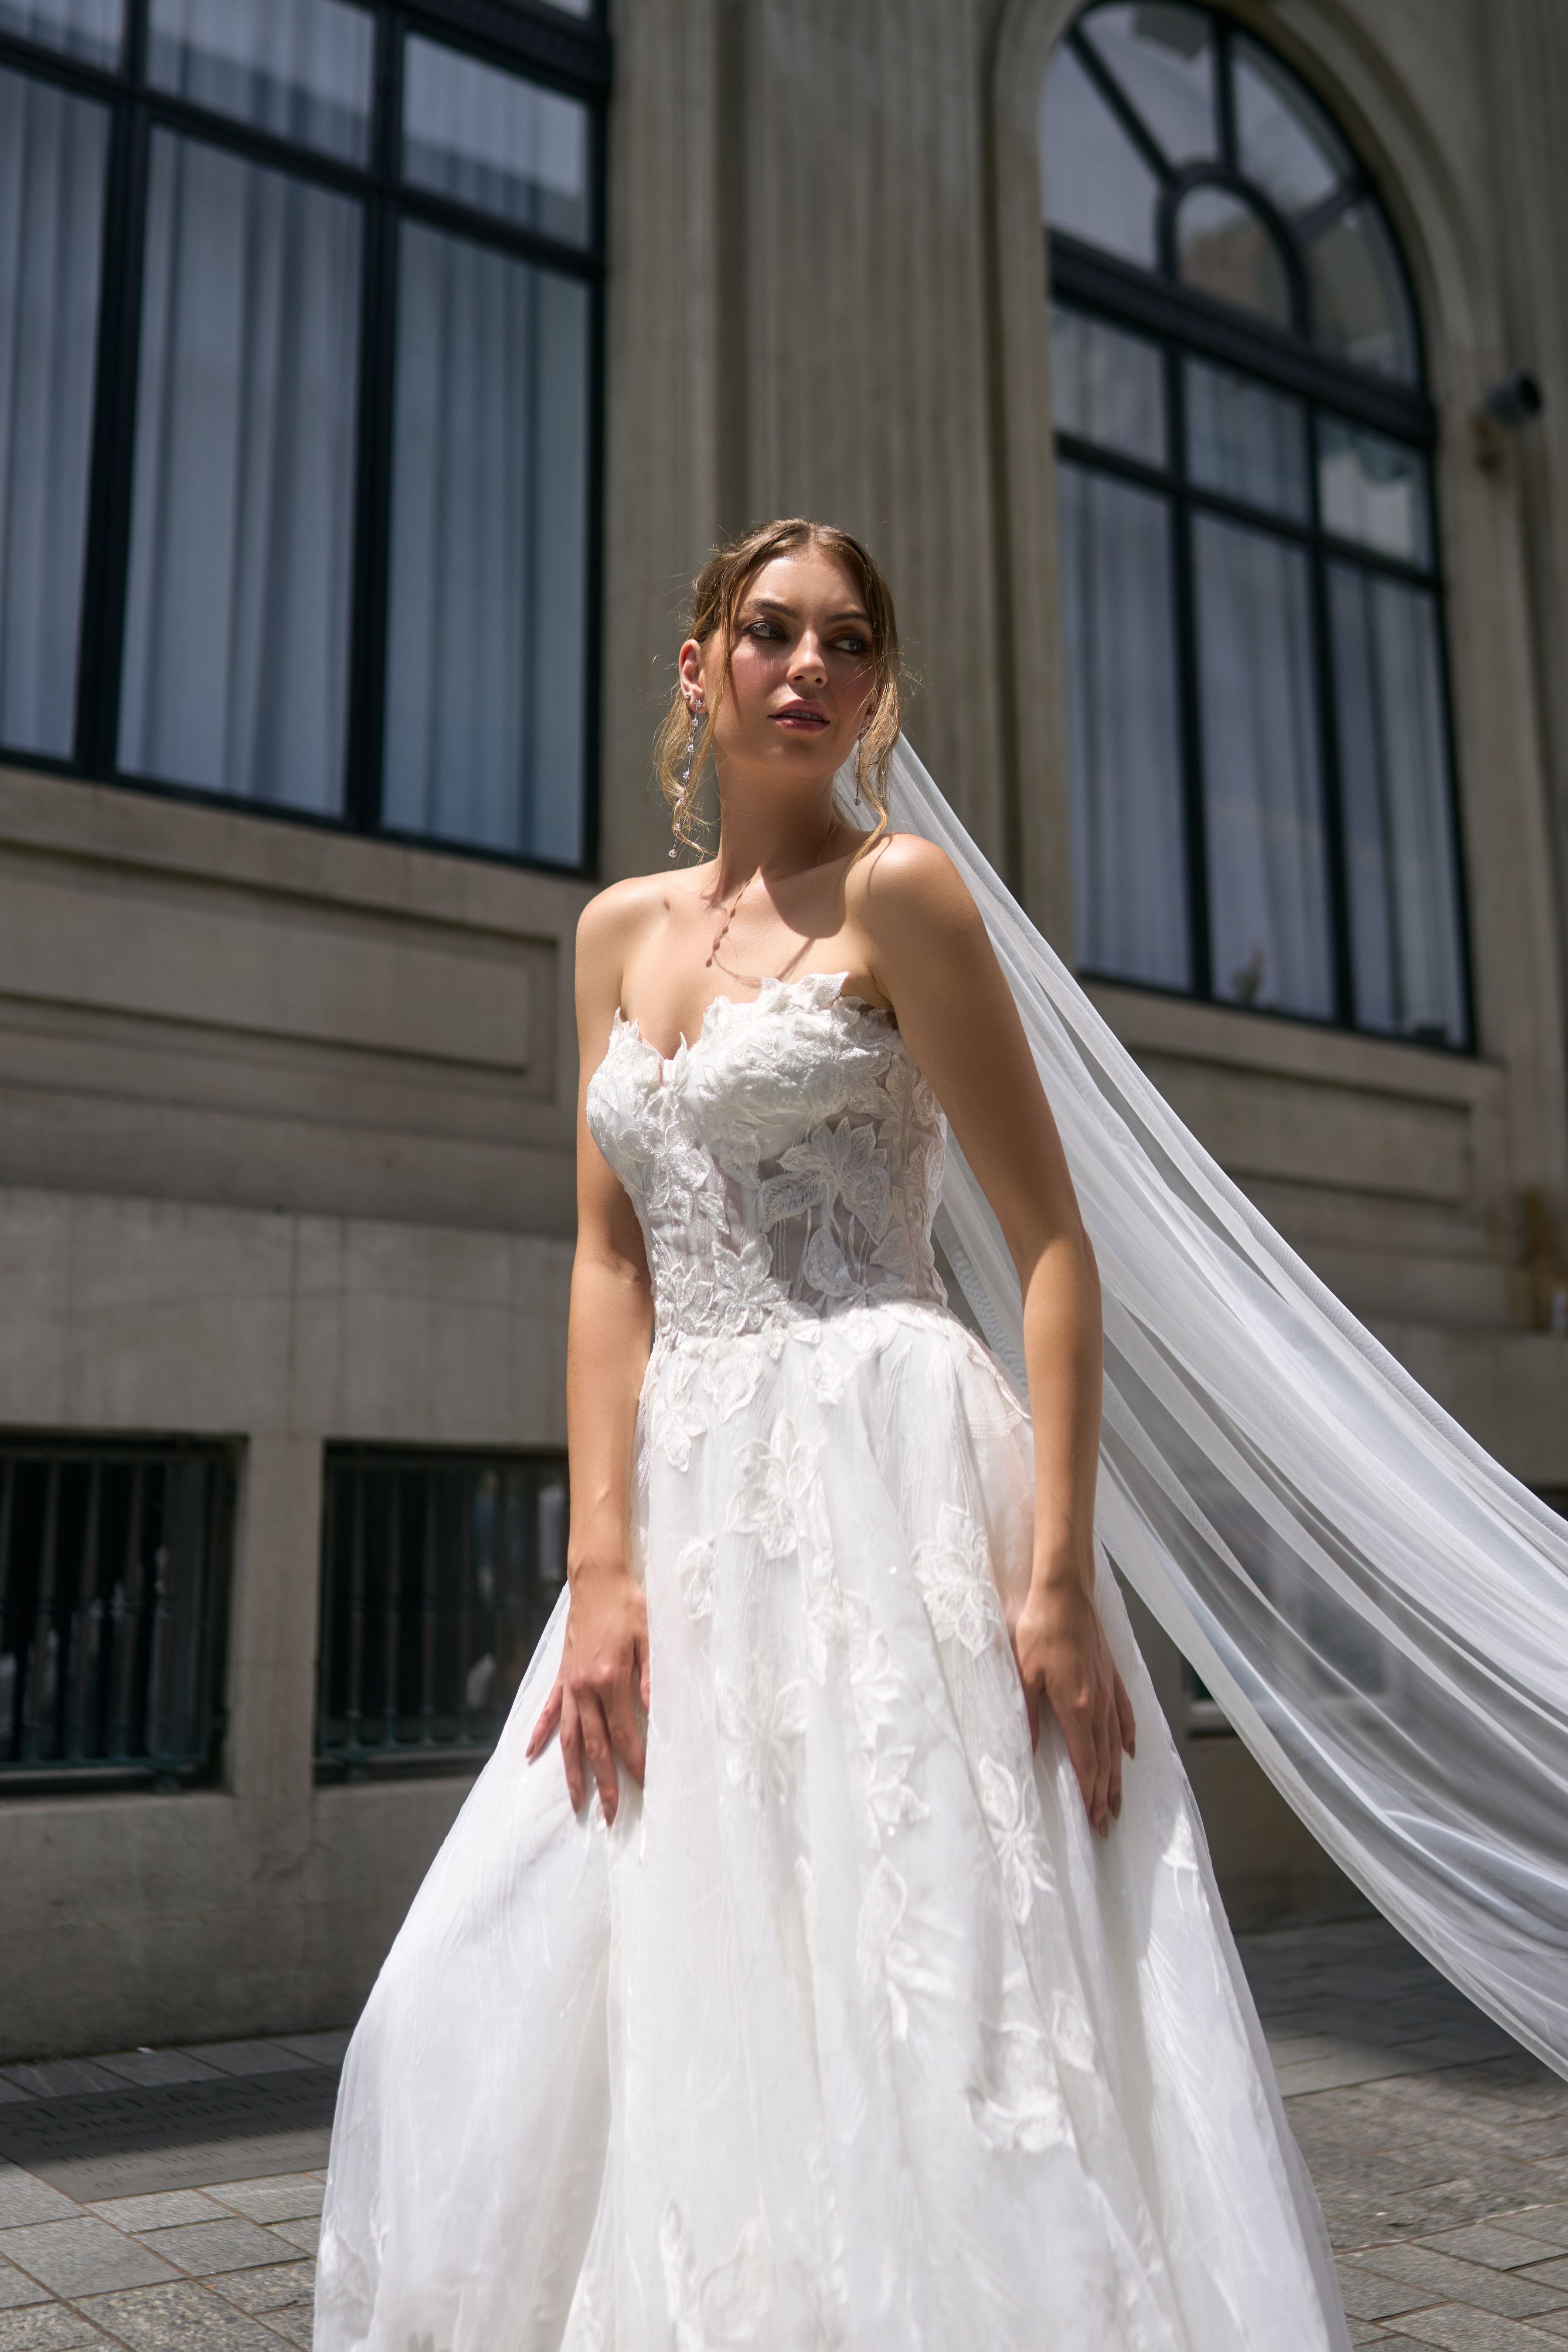 Renee wedding dress with unique A-line silhouette, crafted in floral fabric. Strapless design cinches at the waist for support at the décolletage. Flowy skirt adds lightness and luxury to the dress.